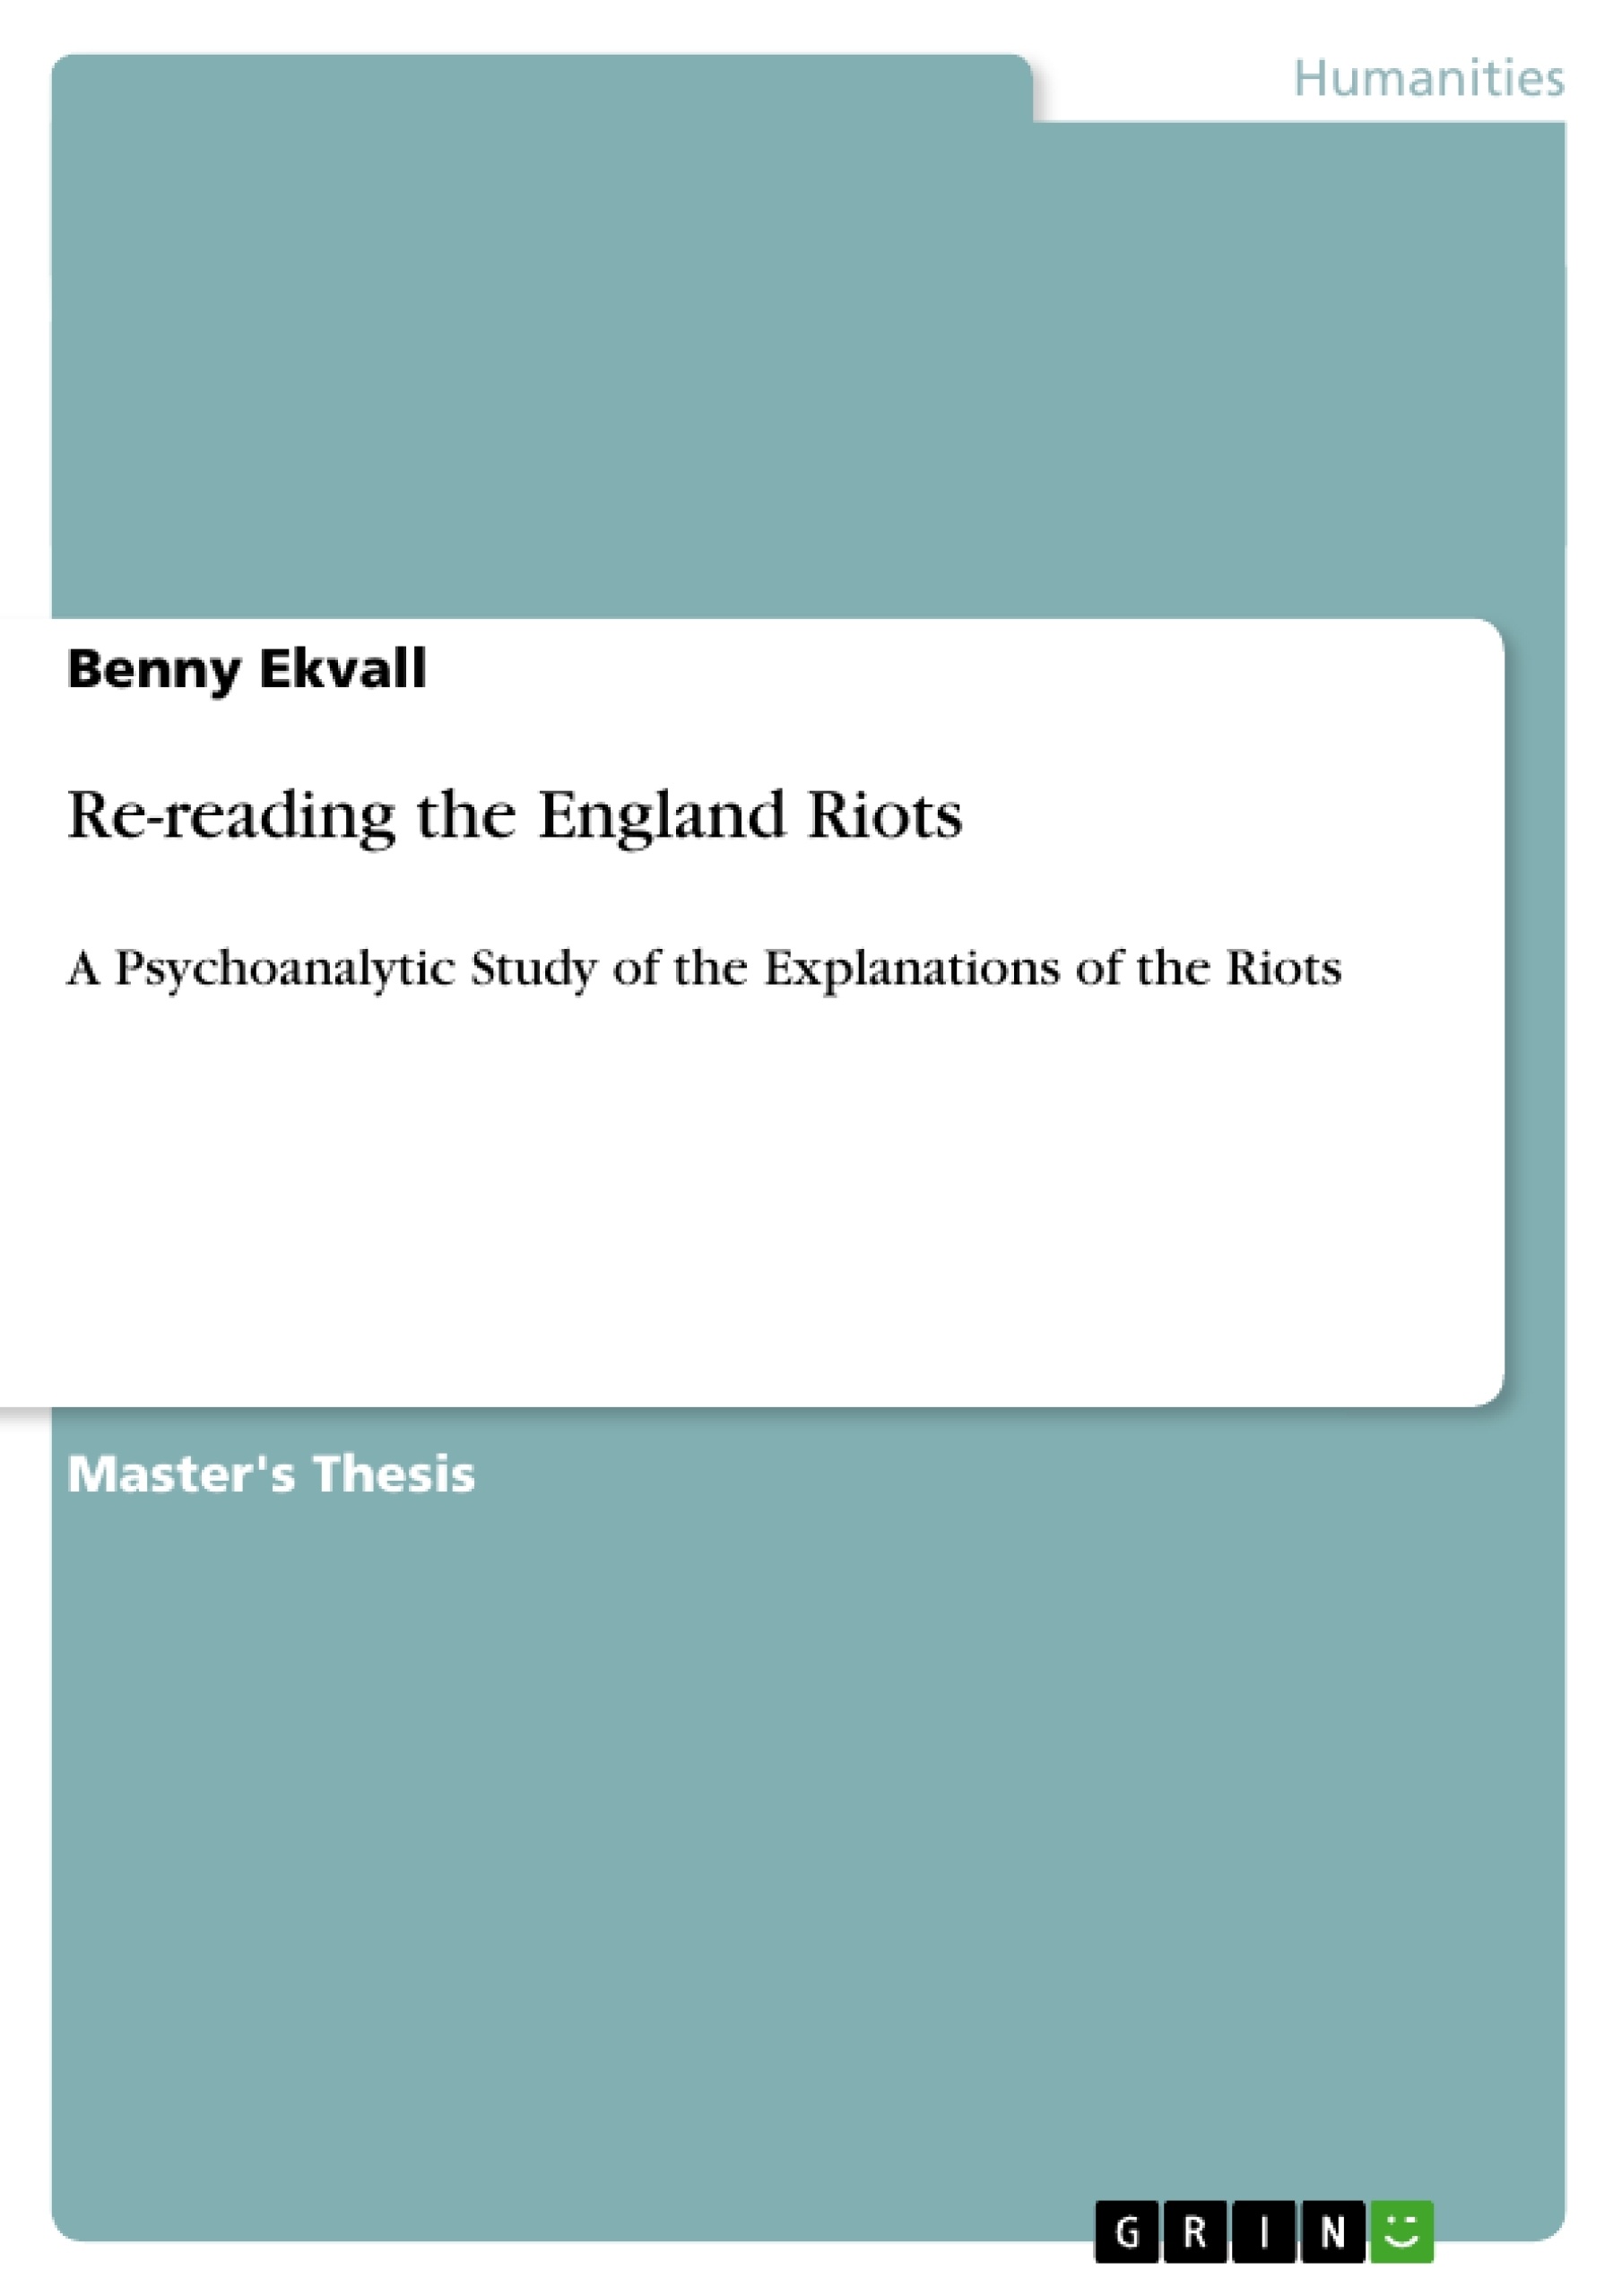 Título: Re-reading the England Riots